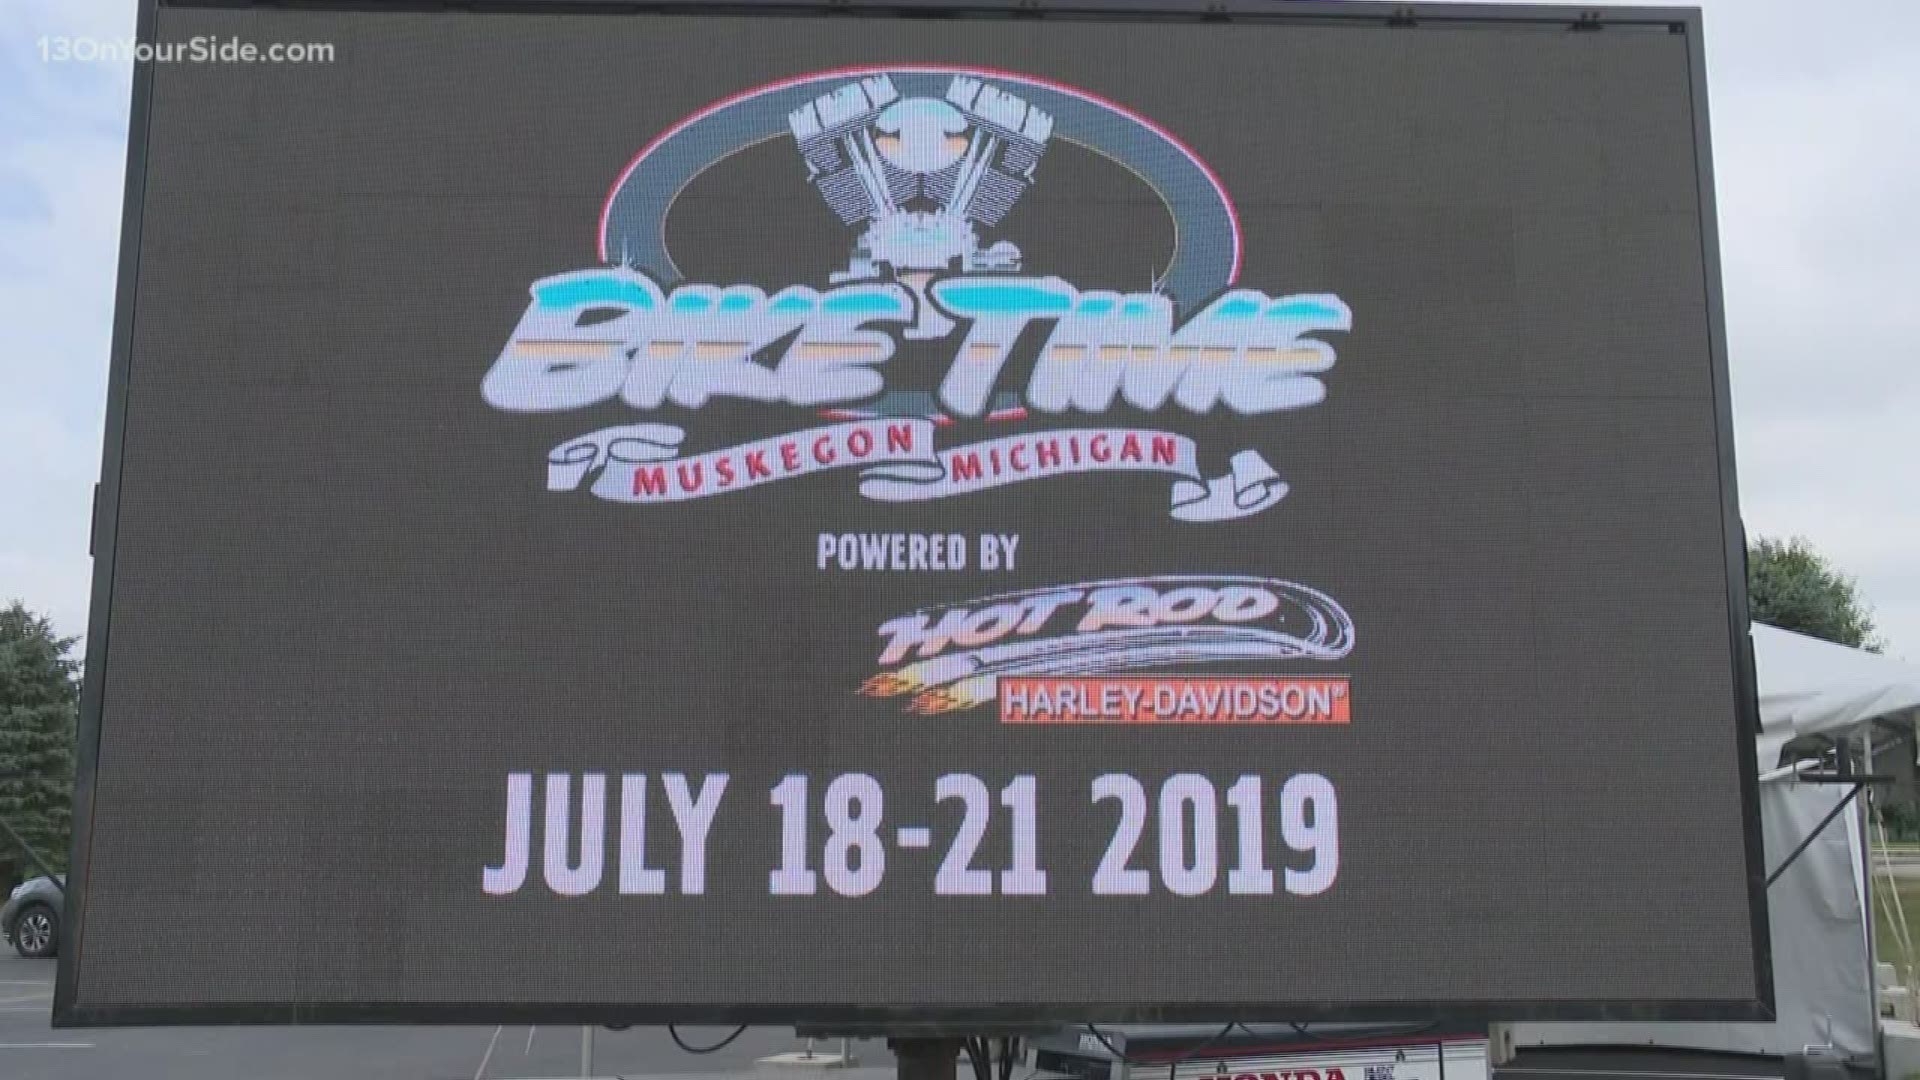 The two events will attract an estimated 120,000 visitors to Muskegon and 40,000 motorcycles.